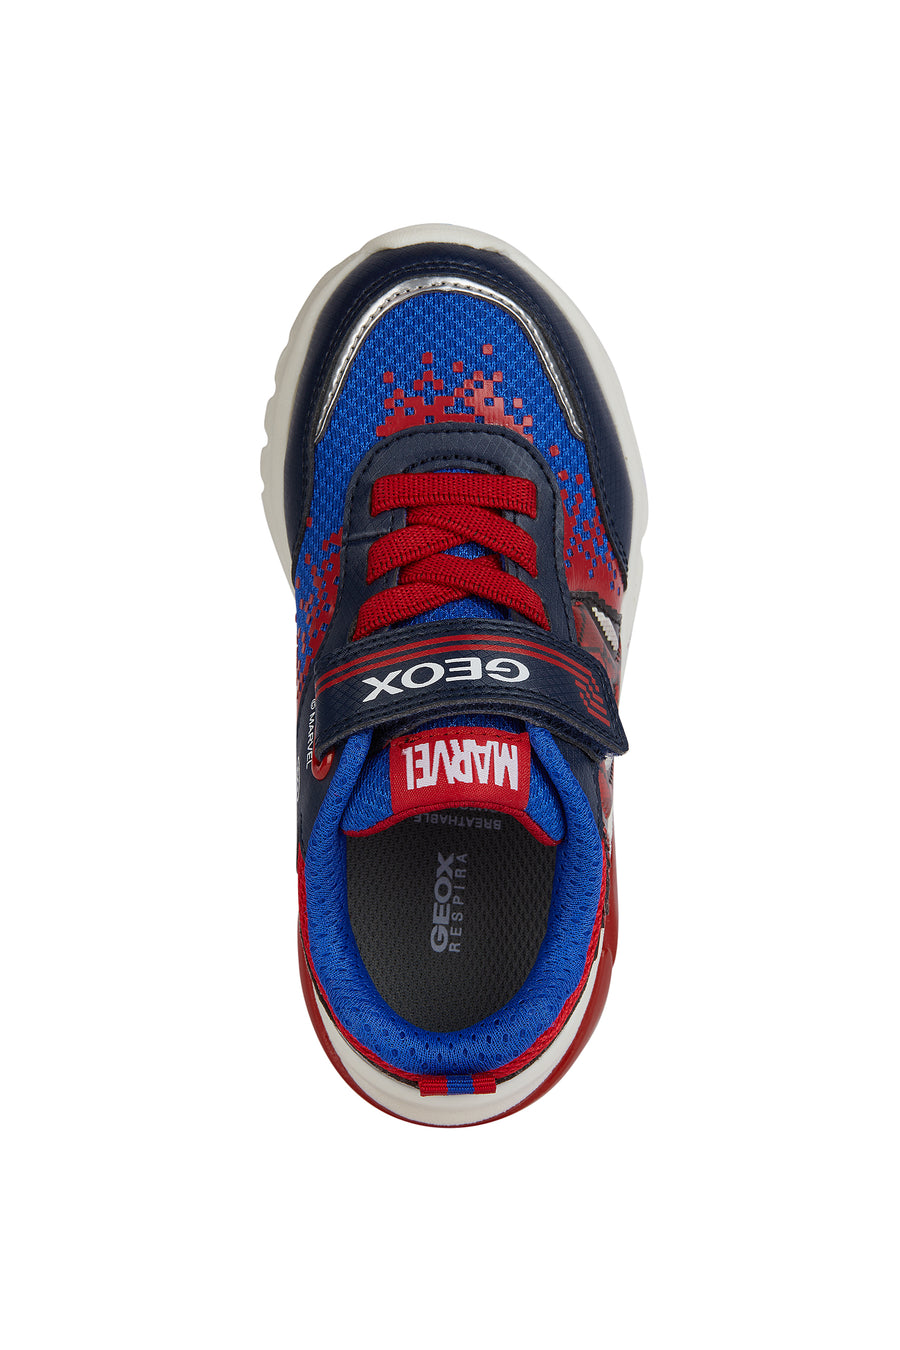 Geox Ciberdron Trainers | Spiderman | Navy & Red